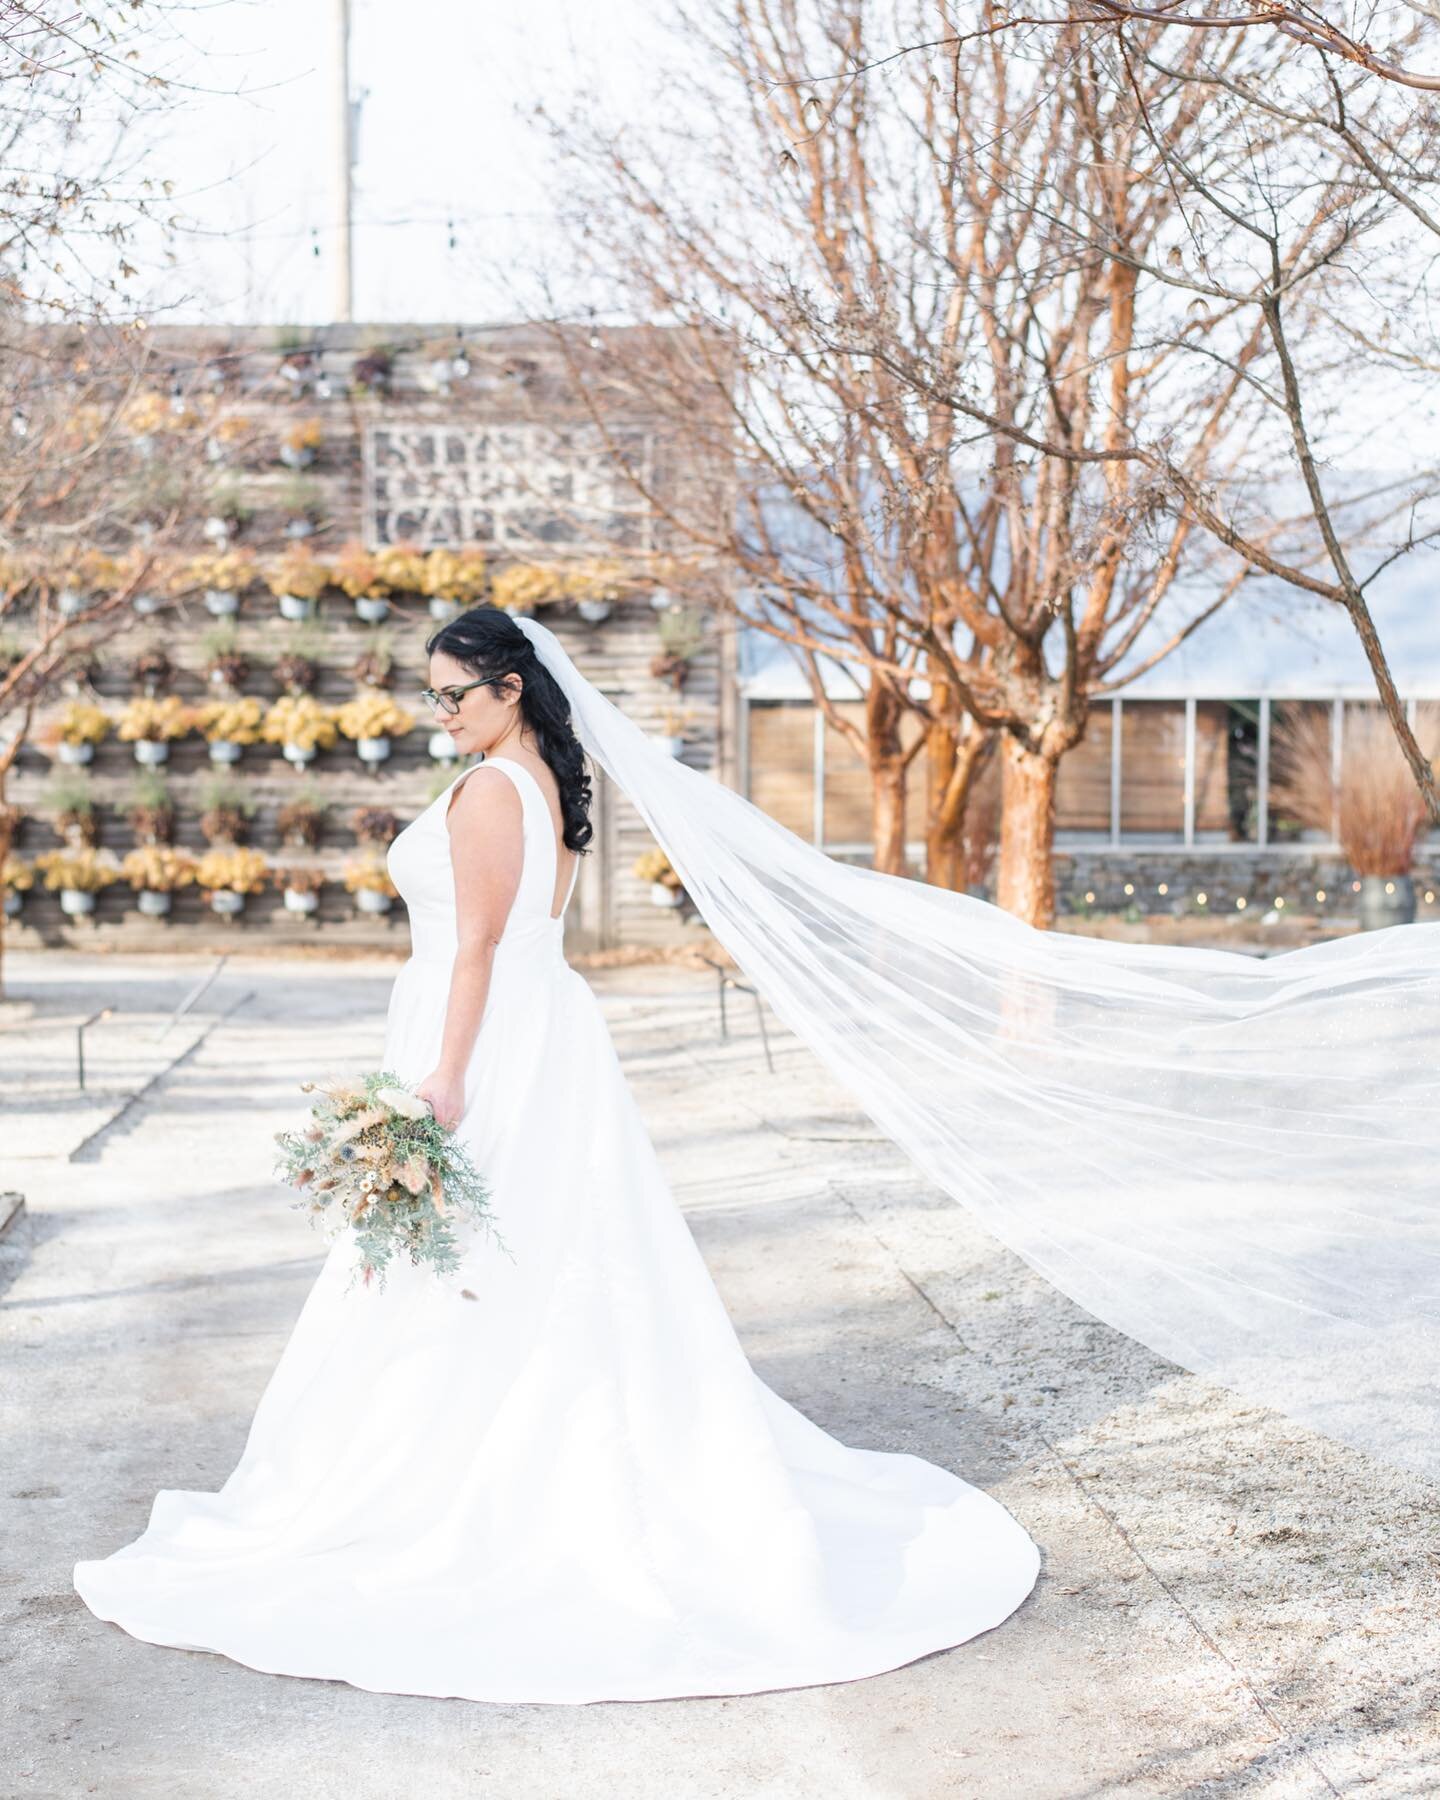 This bride wearing a @missstellayork dress is stunning to say the least!! 😘💋
 
Venue + Caterer | @terrain_events
Hair and Makeup | @earthtonesartistry
Dress | @missstellayork
Bridesmaid Dresses | @shoprevelry
Music | @patandseankelly
Cake | @the_su